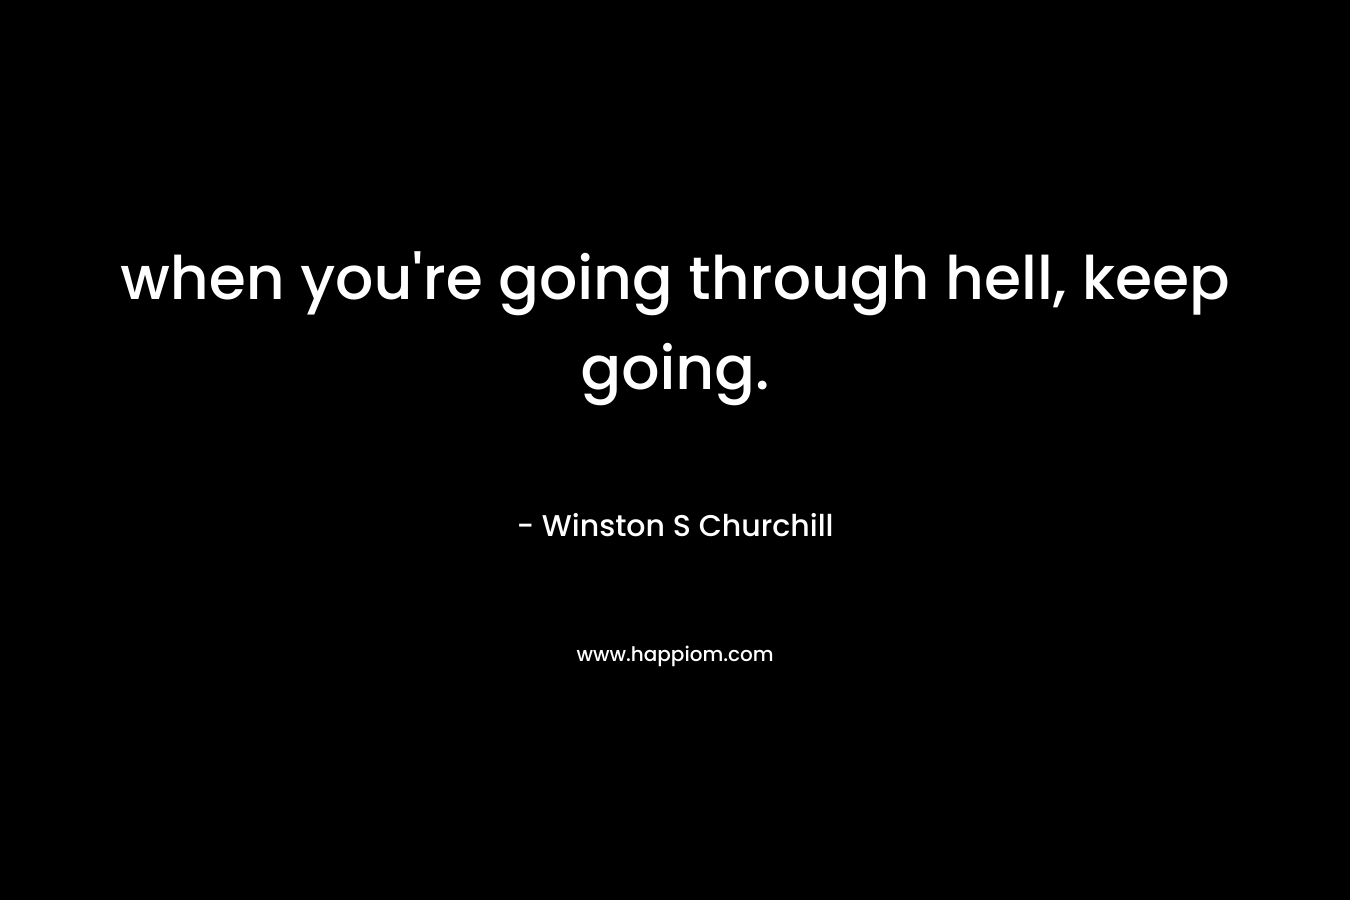 when you're going through hell, keep going.